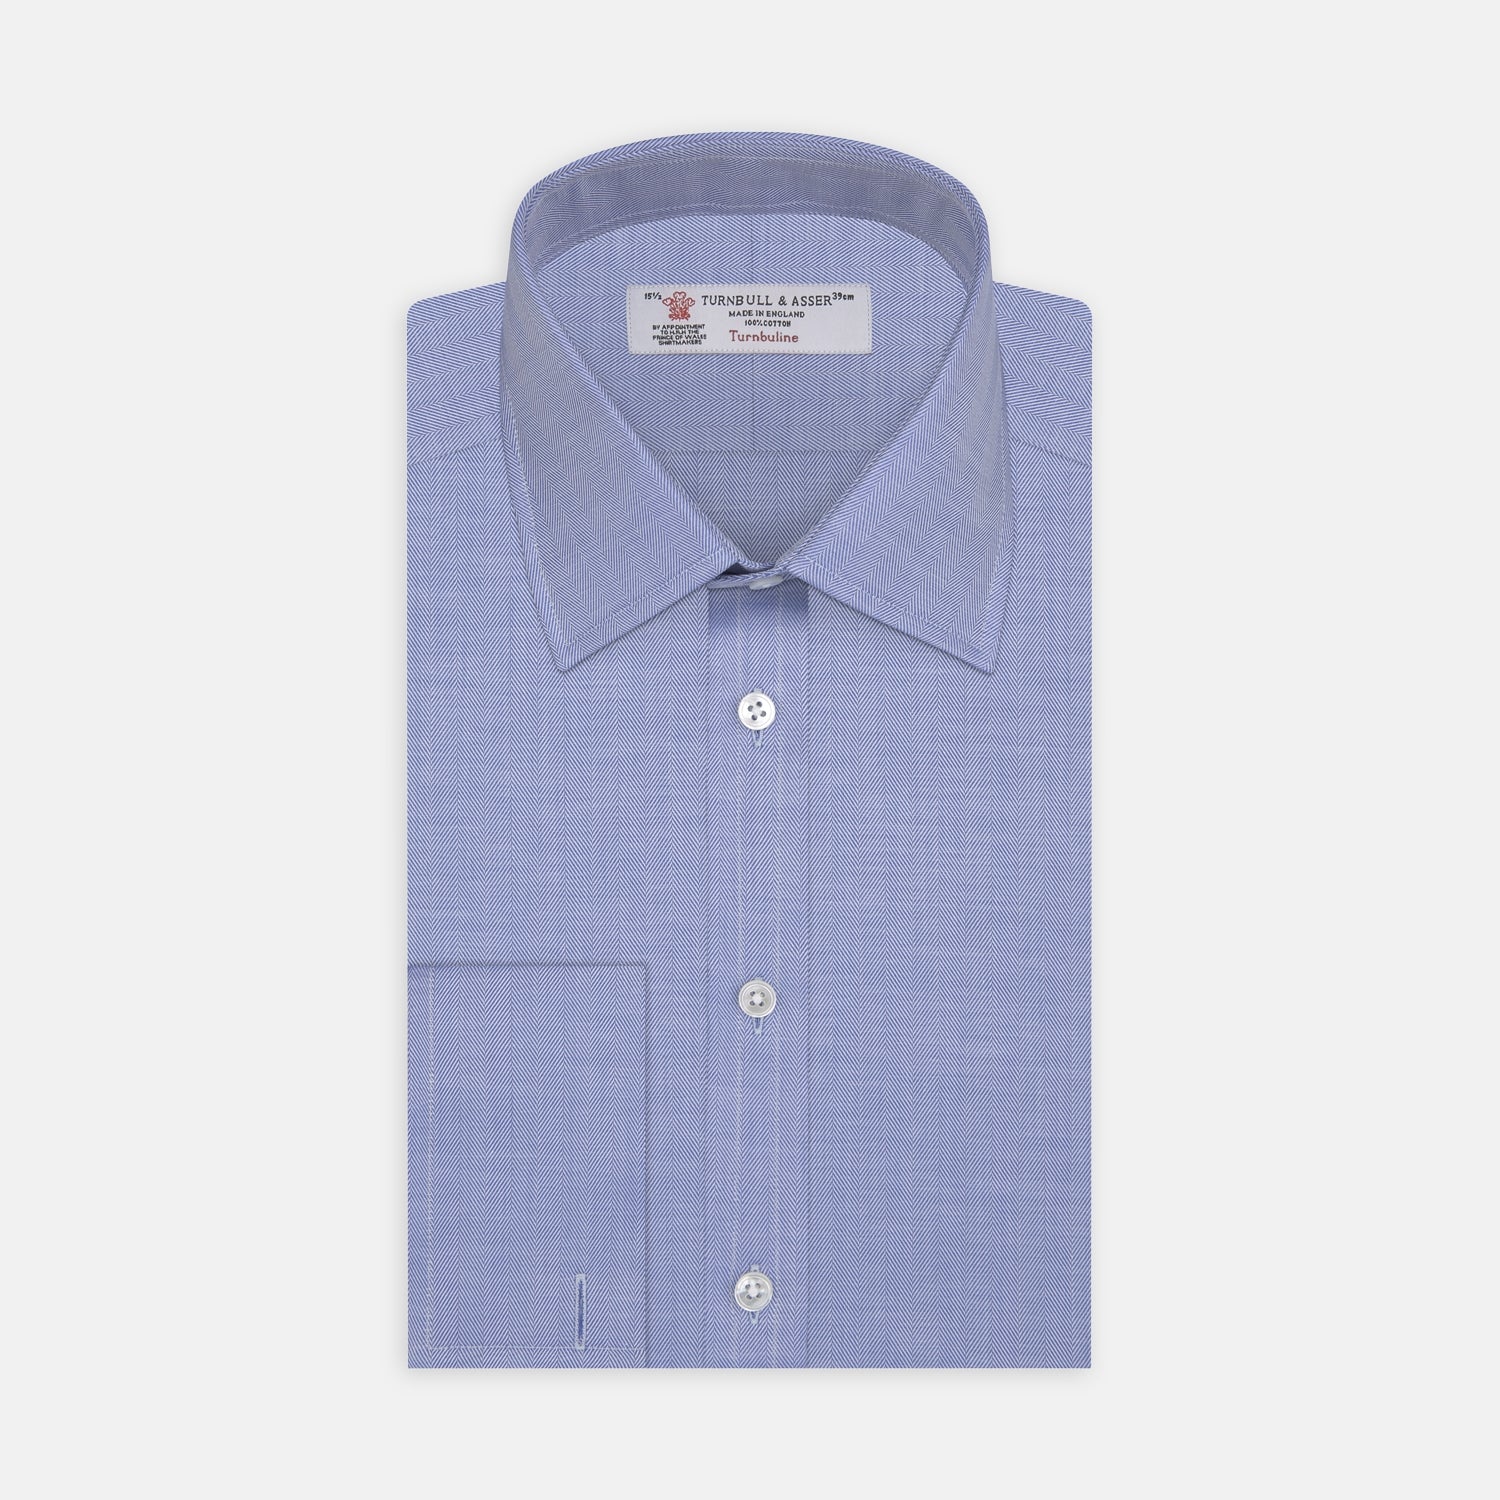 Blue Herringbone Superfine Cotton Shirt with T&A Collar and Double Cuffs